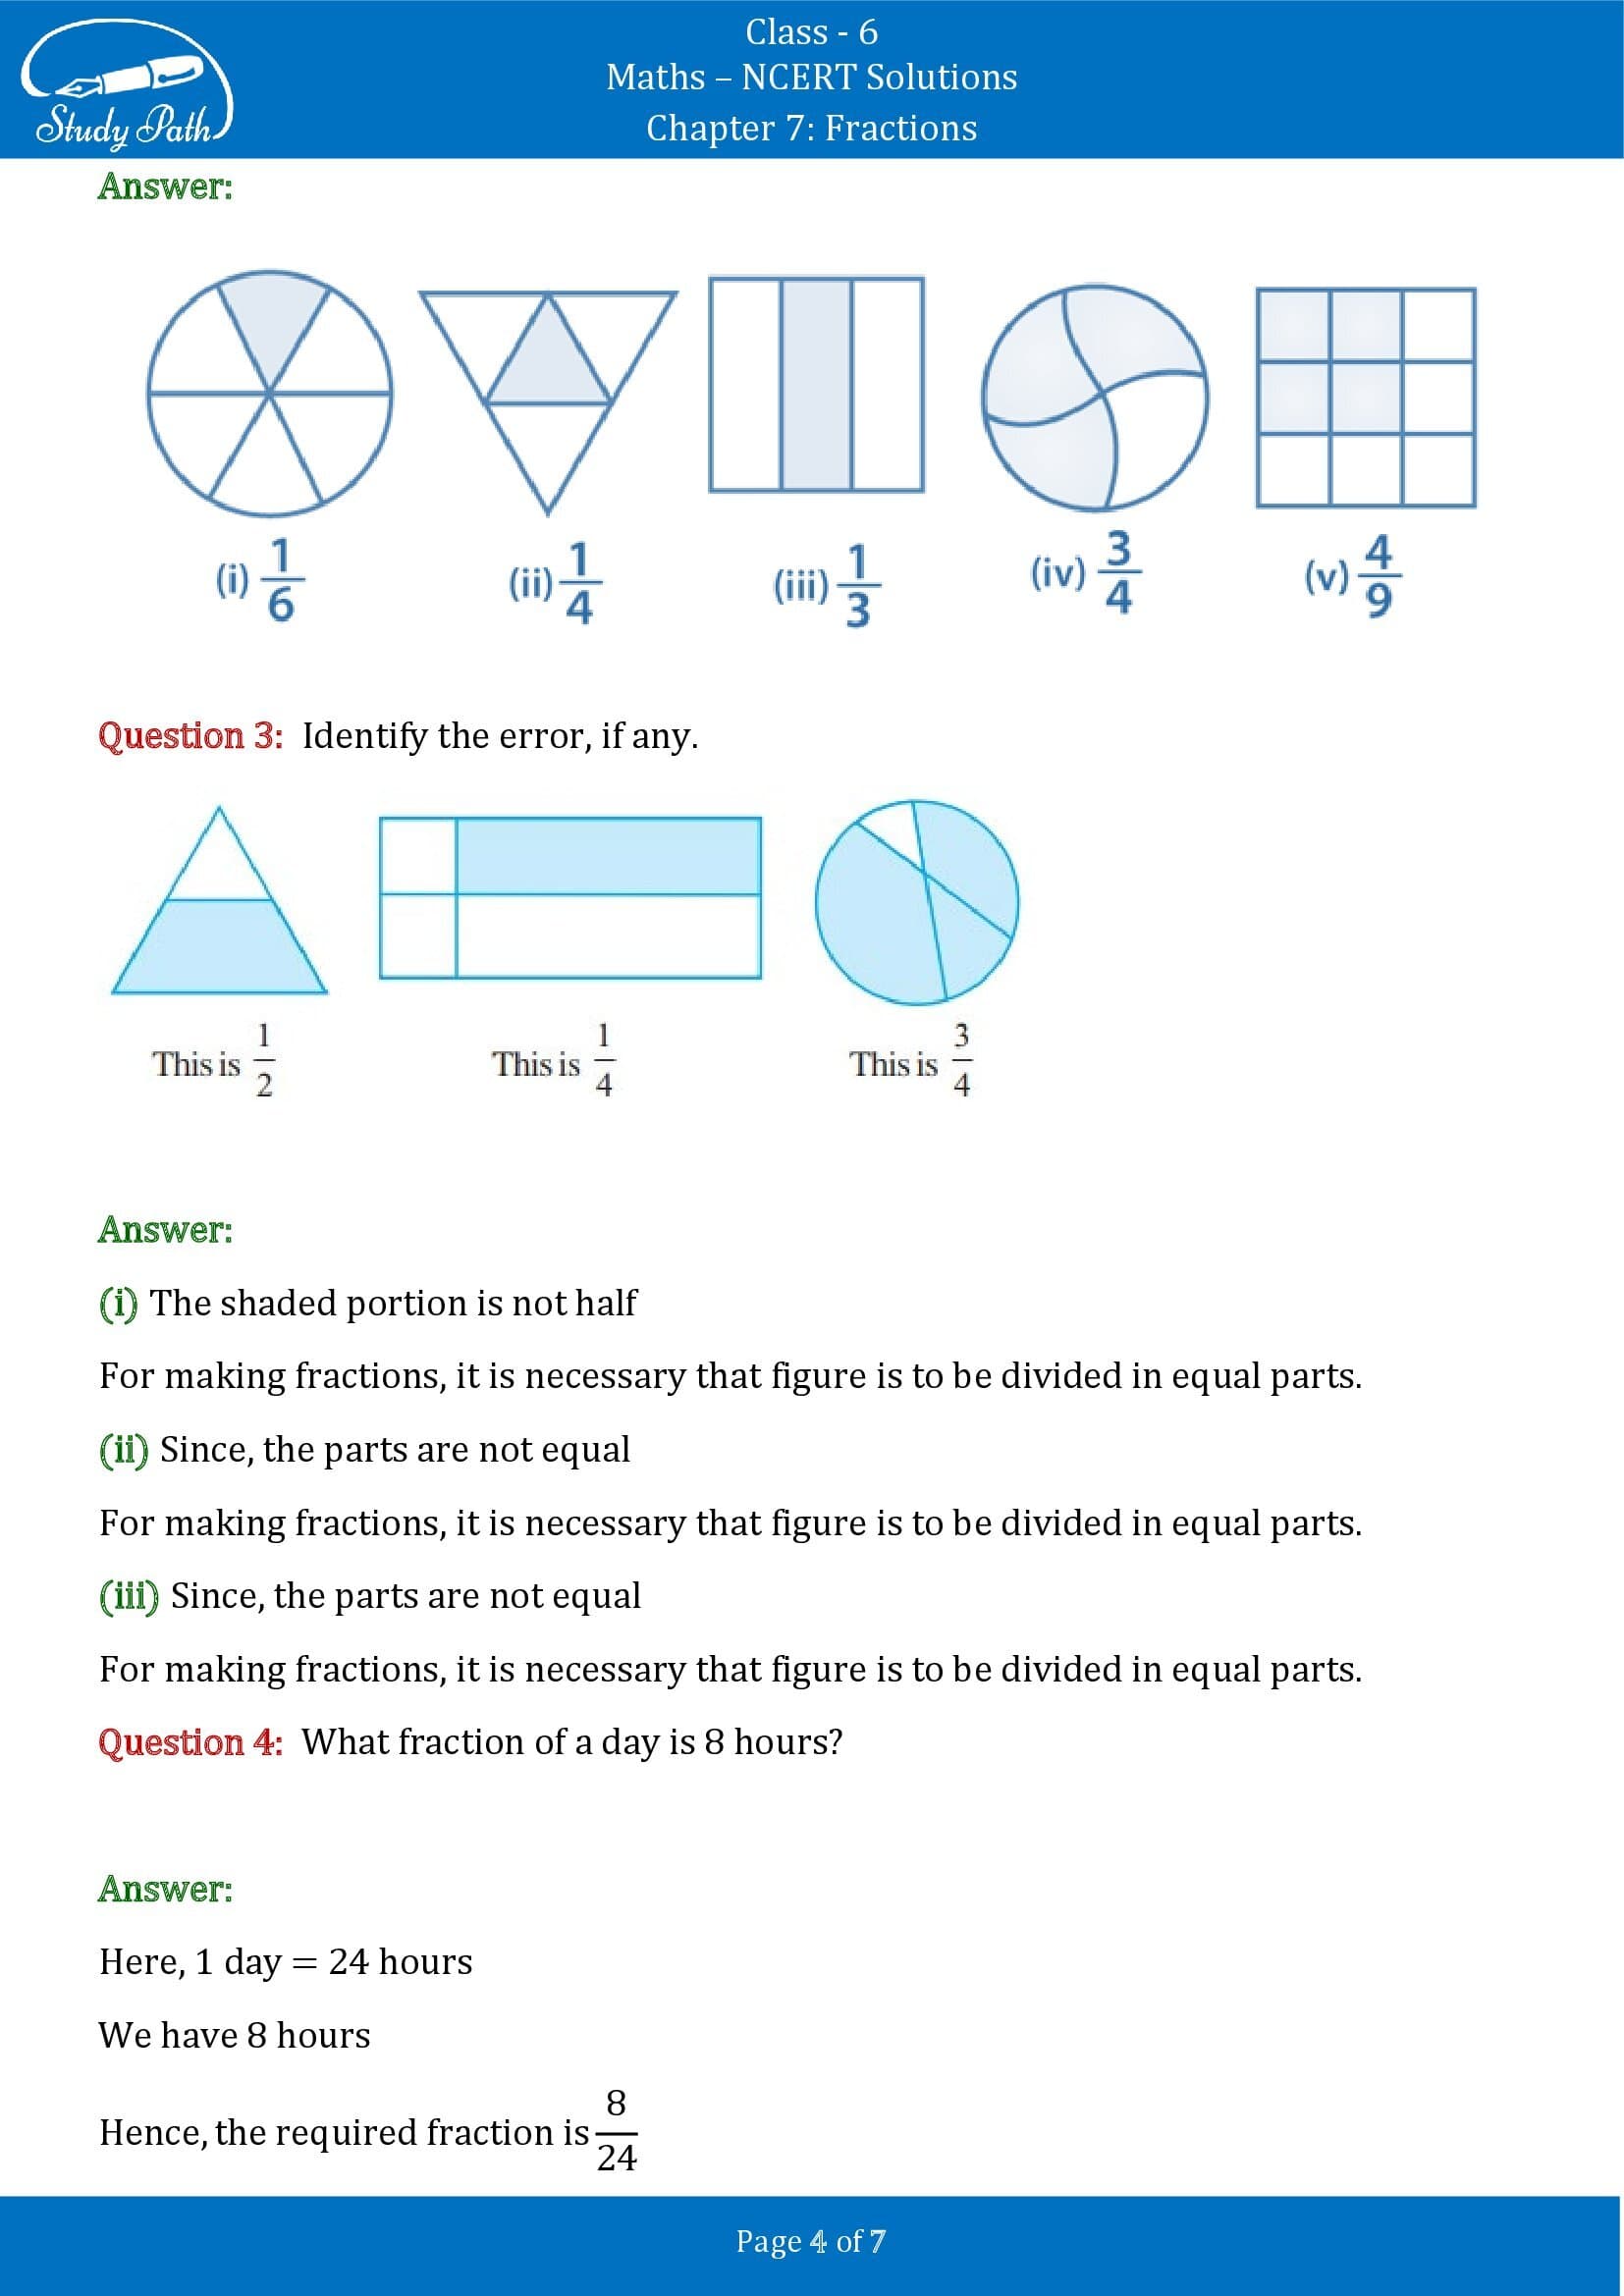 NCERT Solutions for Class 6 Maths Chapter 7 Fractions Exercise 7.1 00004